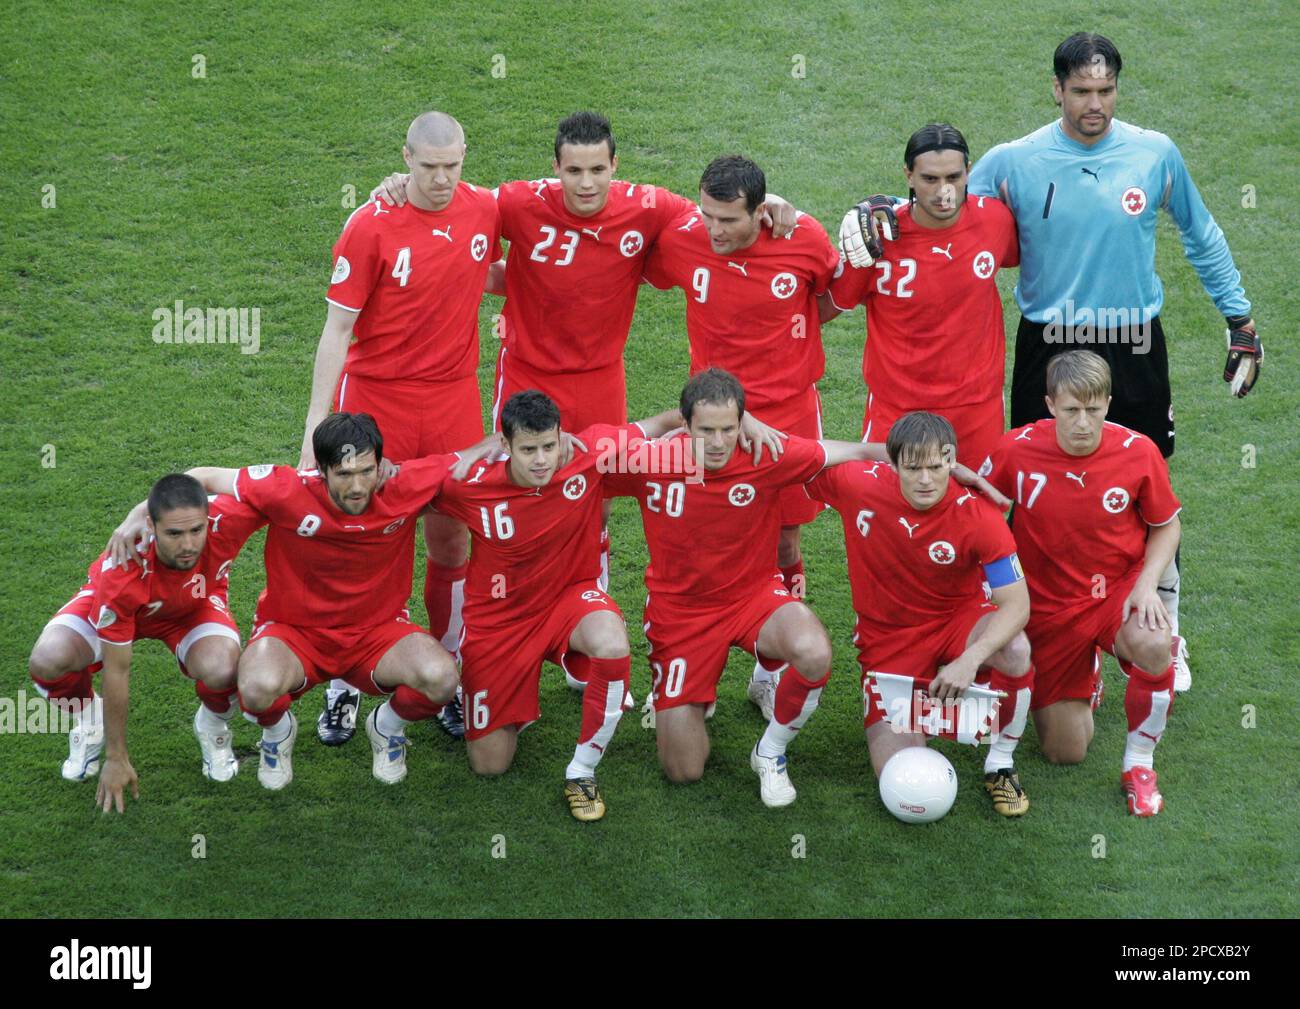 Switzerlands line up prior to the Switzerland vs South Korea, Group G, World Cup 2006, soccer match at World Cup stadium in Hanover, Germany, on Friday, June 23, 2006